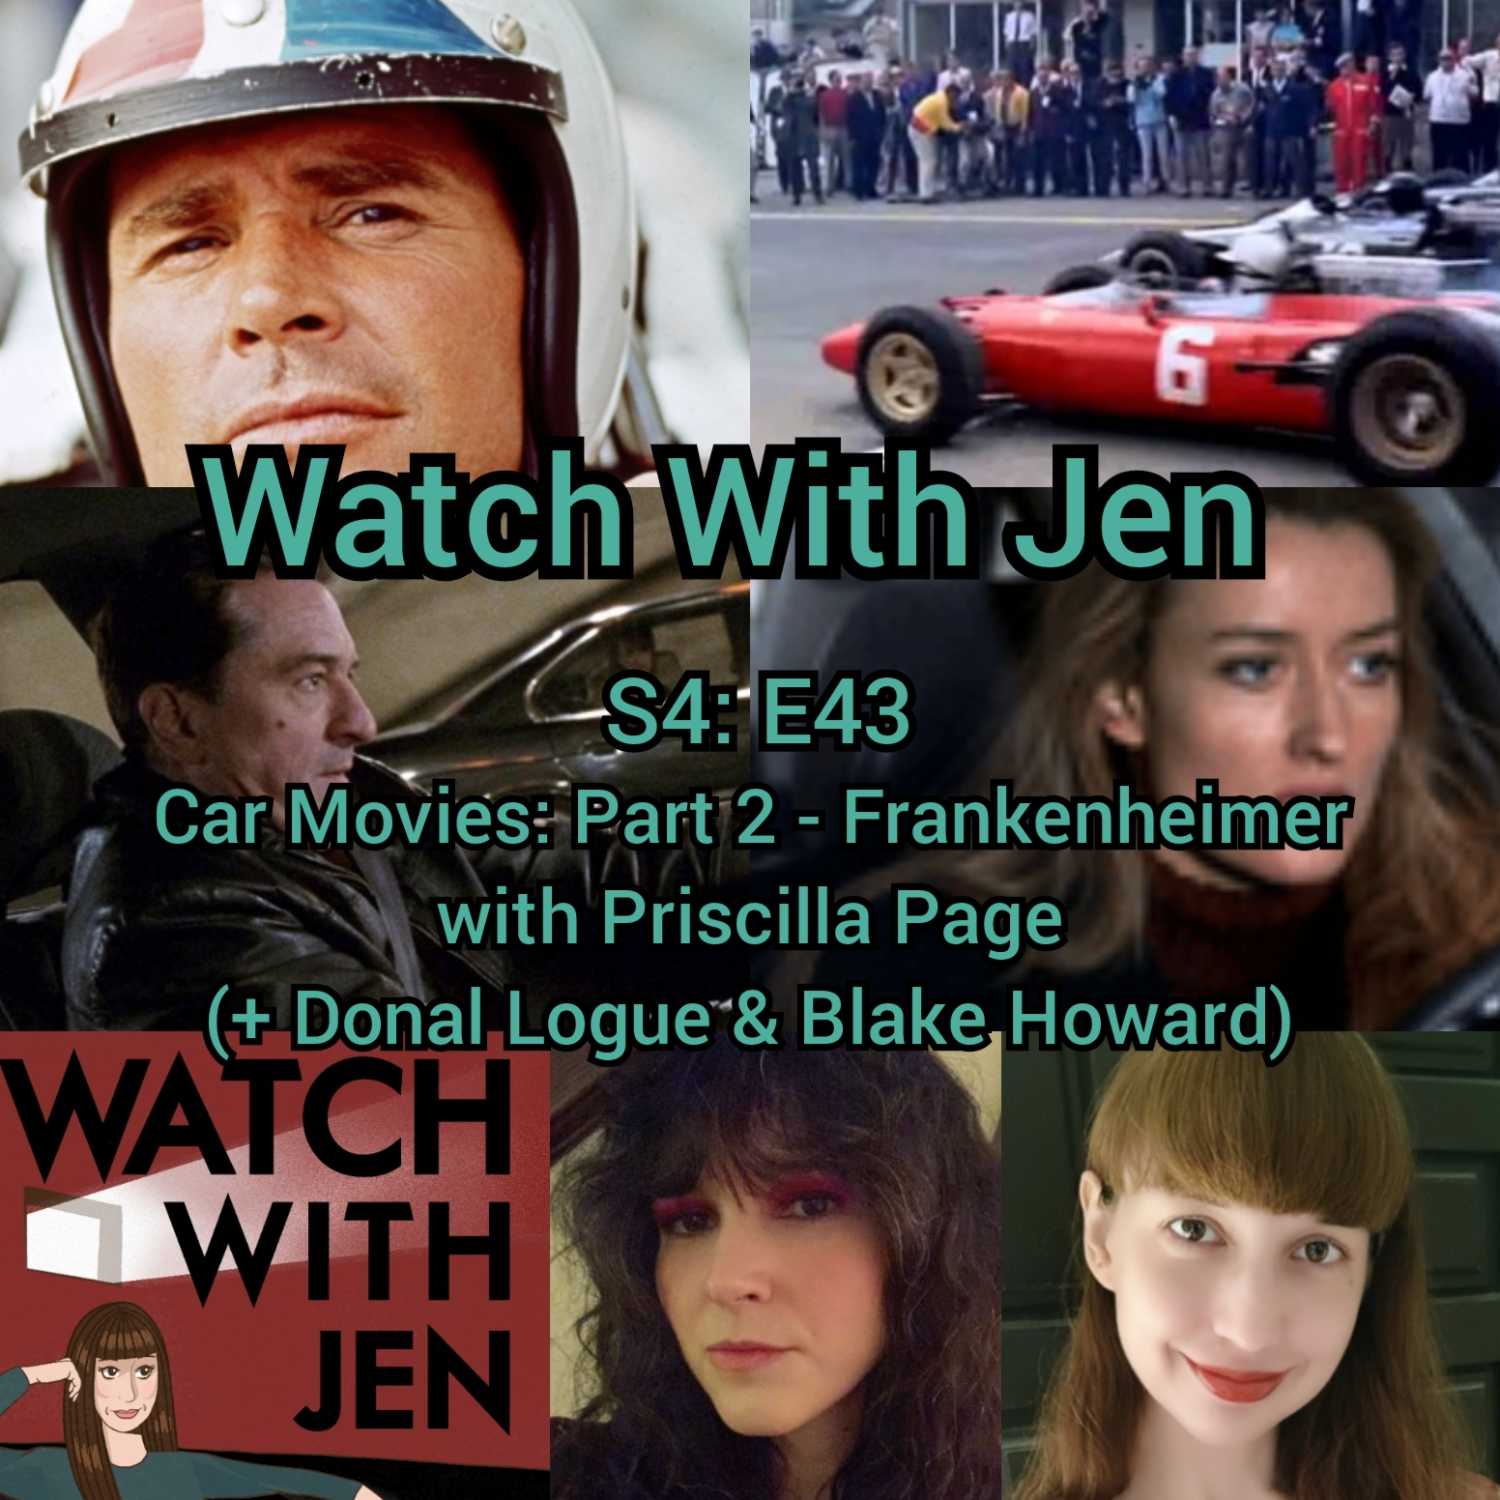 Watch With Jen - S4: E43 - Car Movies: Part 2 - Frankenheimer with Priscilla Page (+ Donal Logue & Blake Howard)